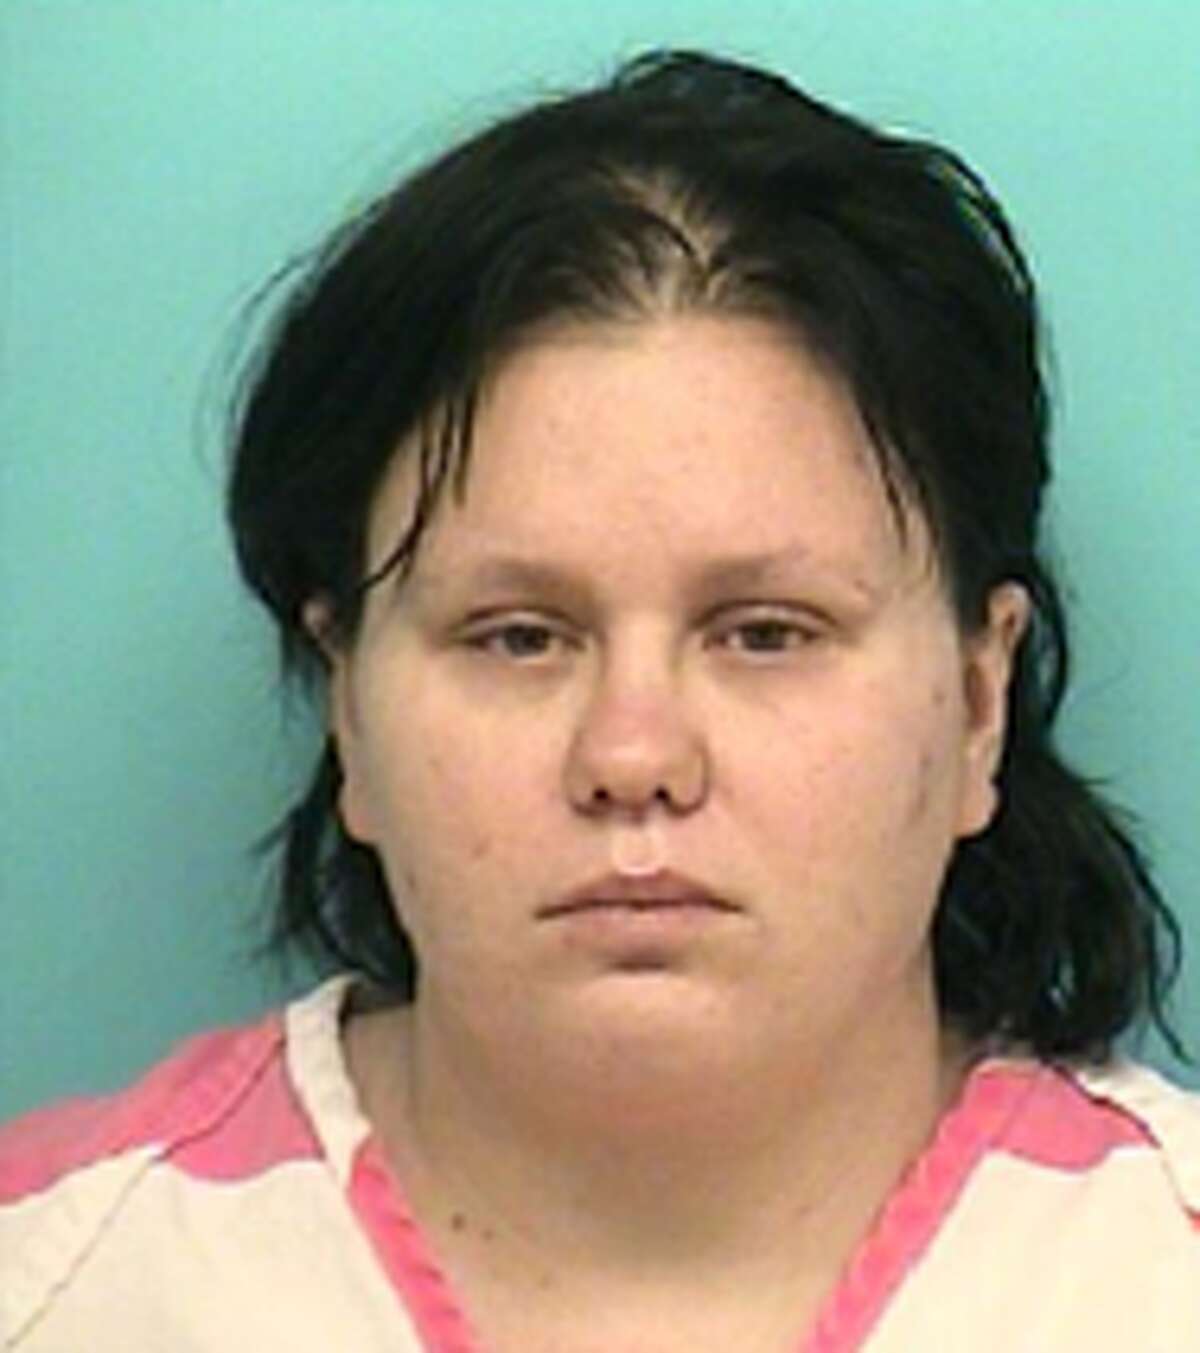 Willis Woman Gets 40 Years For Making Pornographic Videos